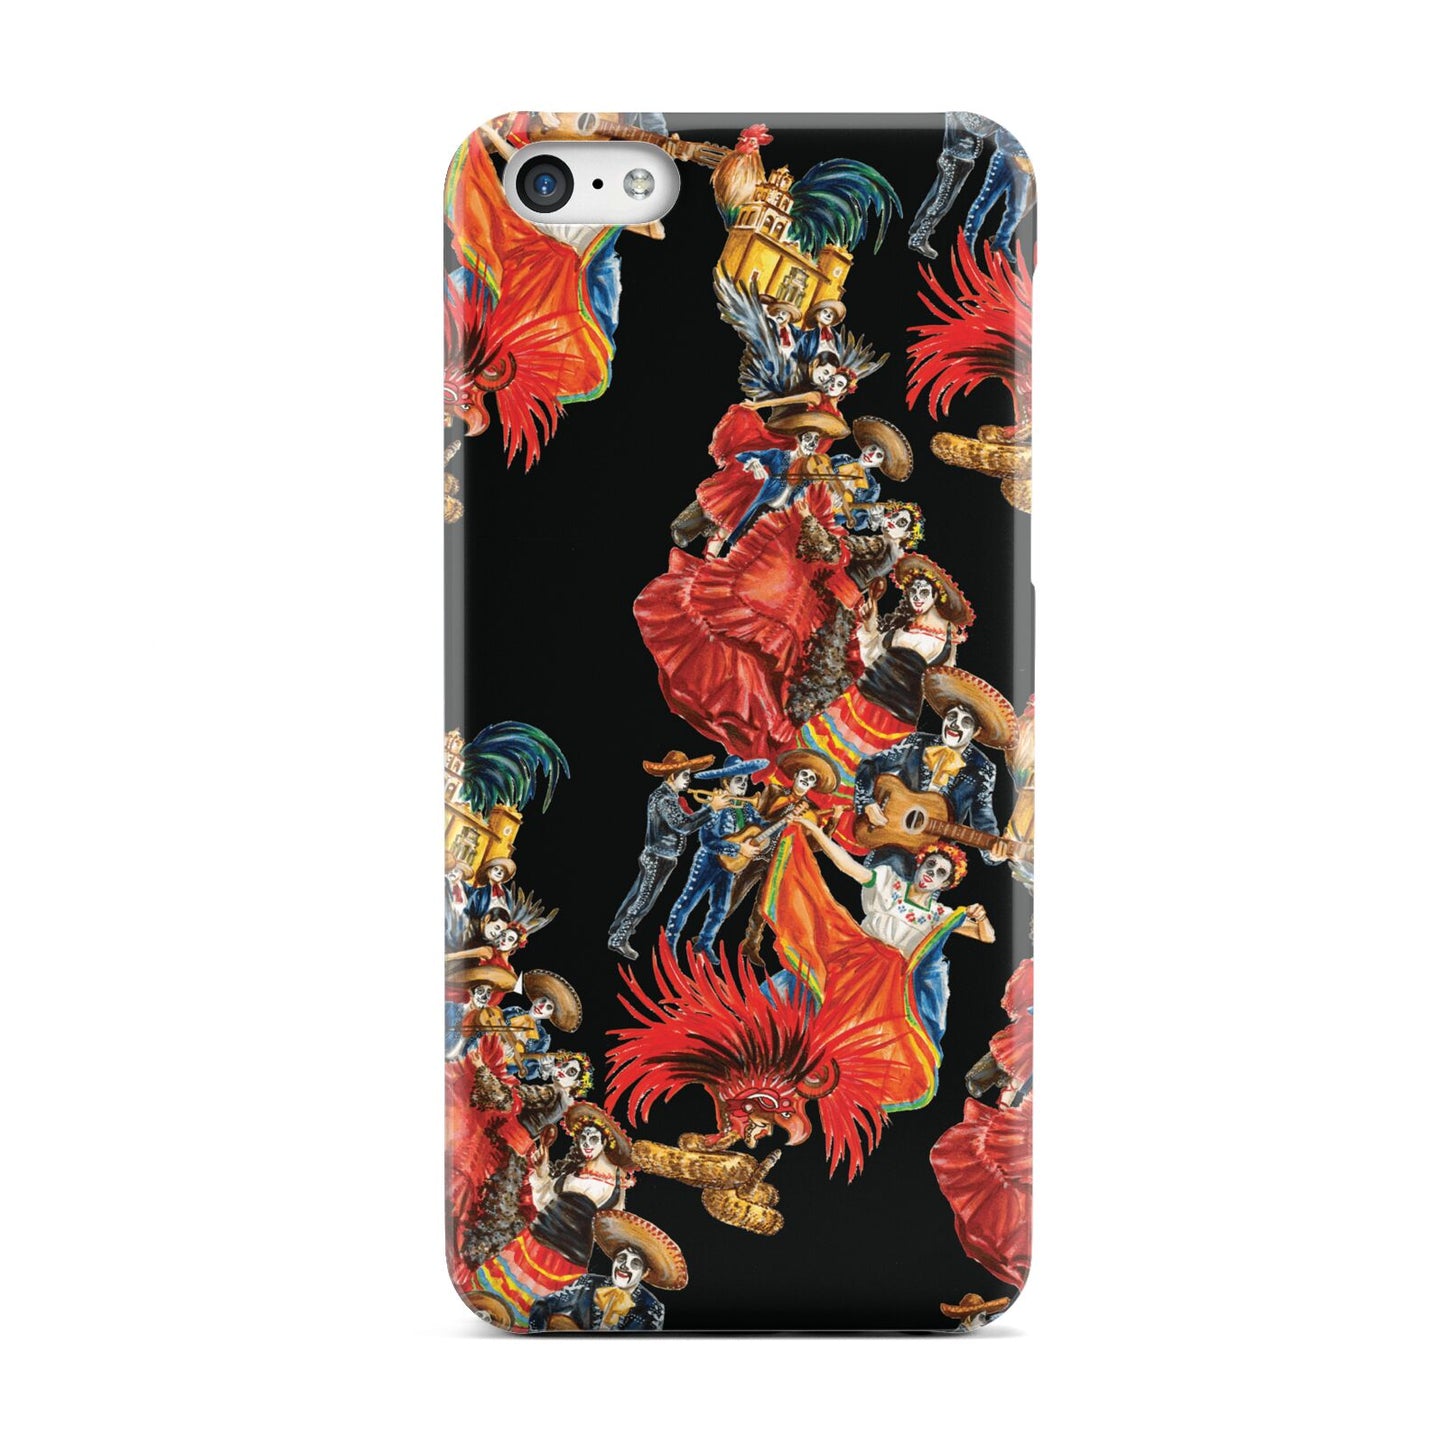 Day of the Dead Festival Apple iPhone 5c Case